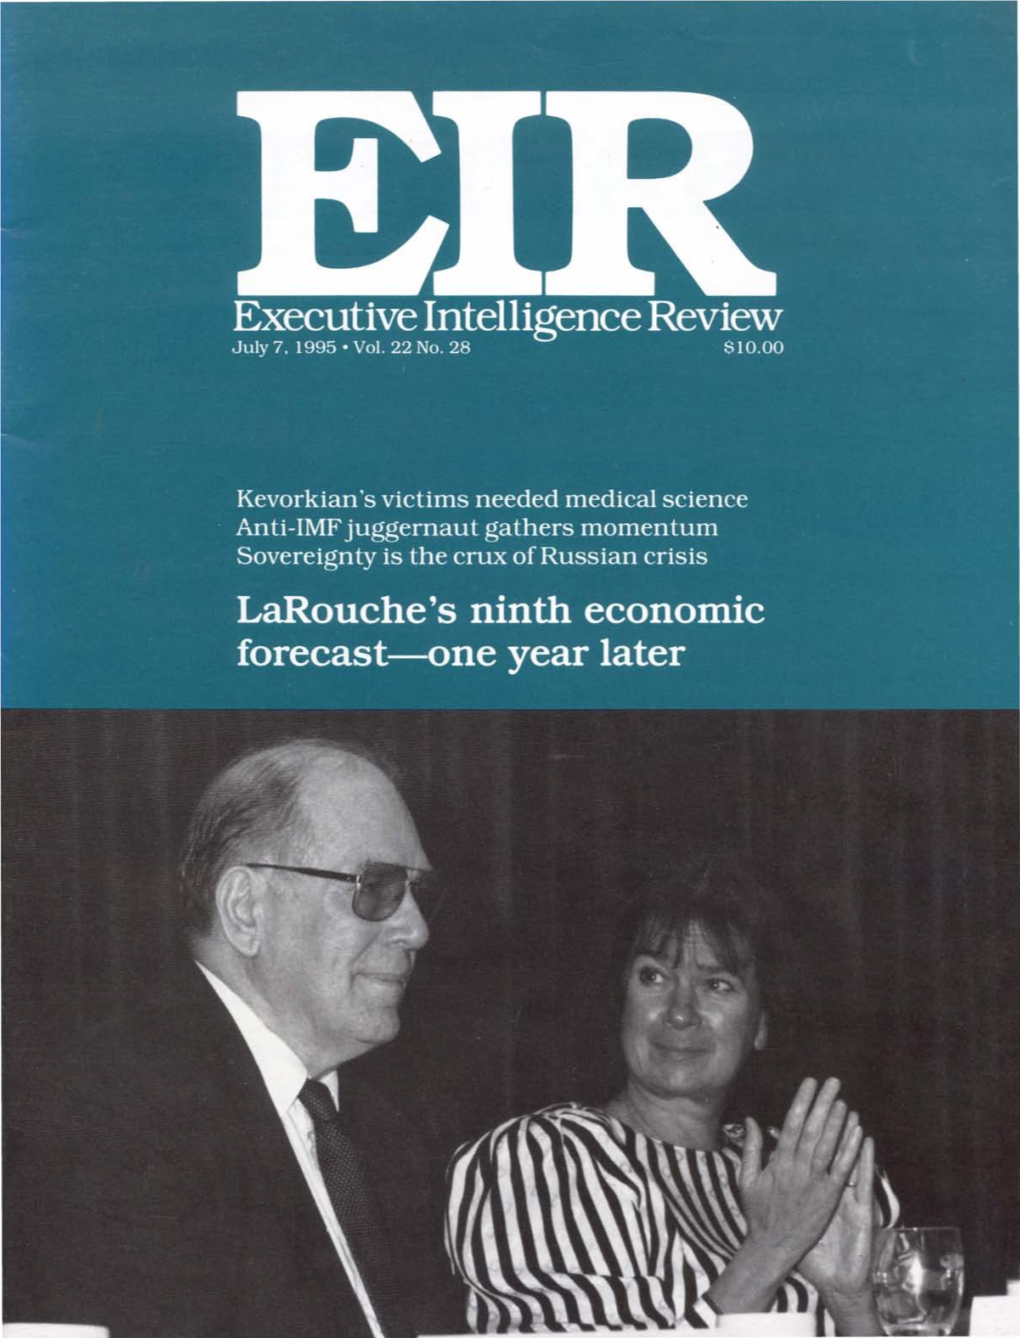 Executive Intelligence Review, Volume 22, Number 28, July 7, 1995